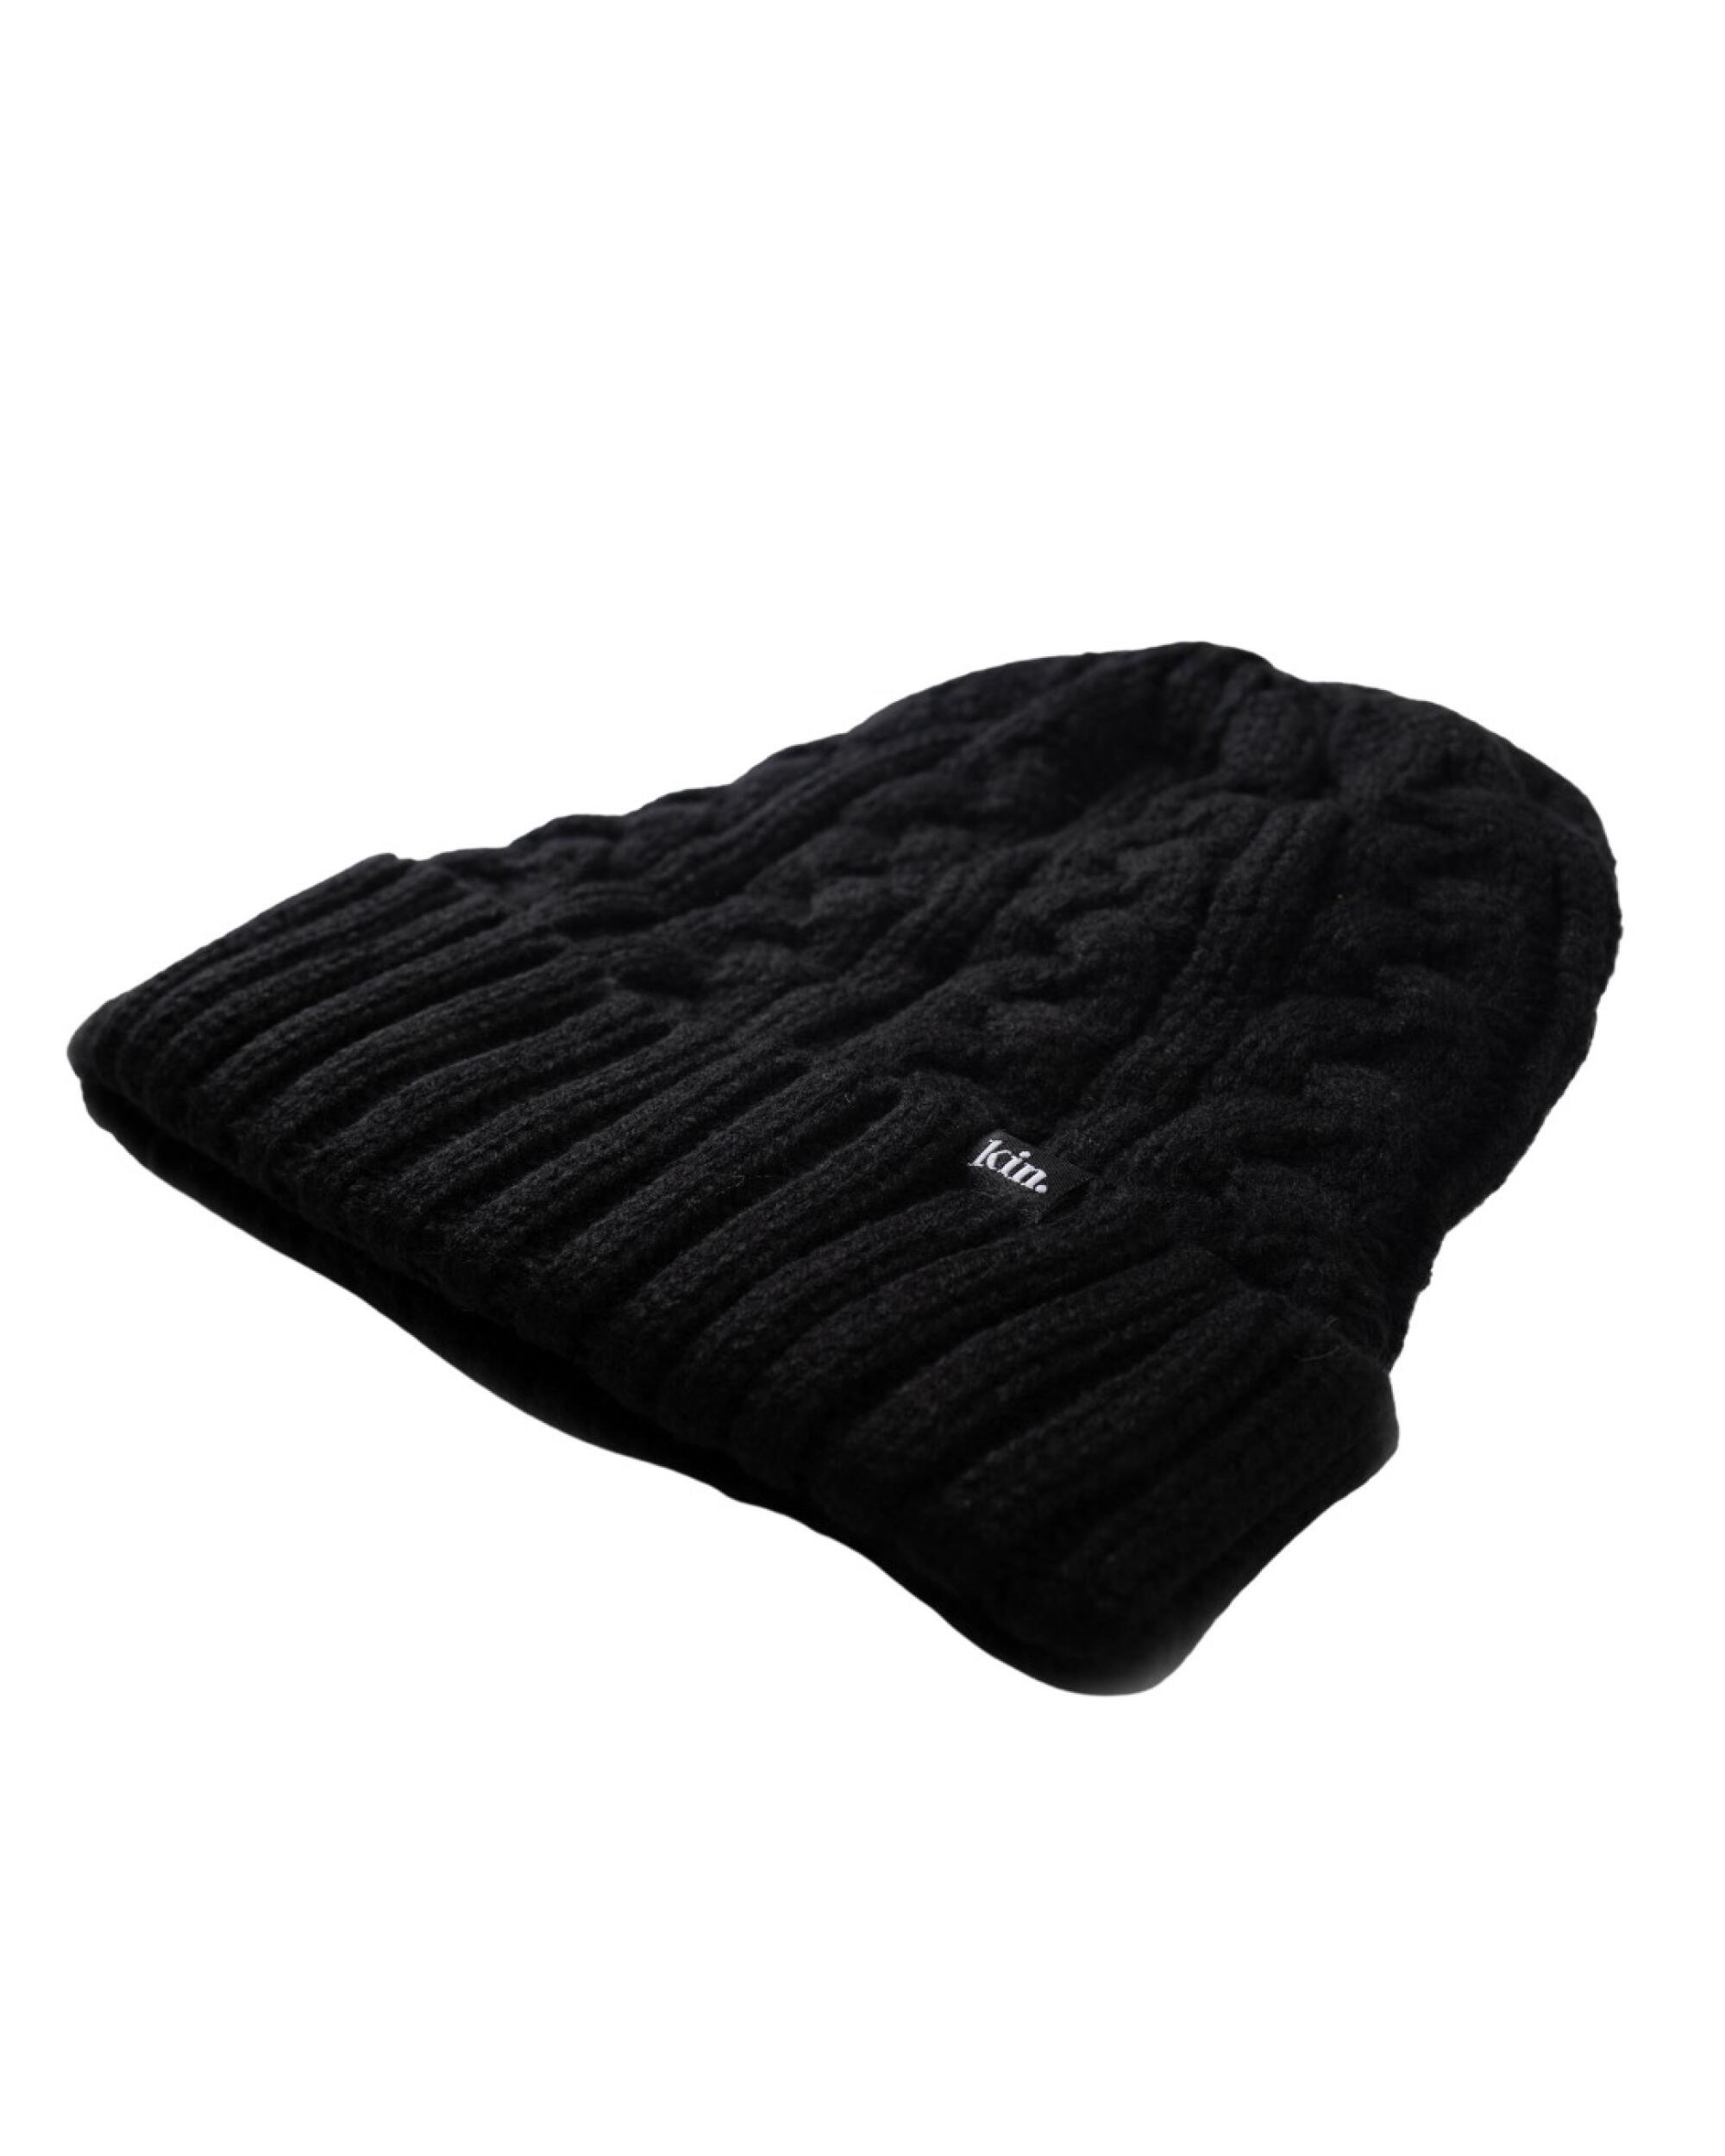 Satin lined beanie from KIN Apparel